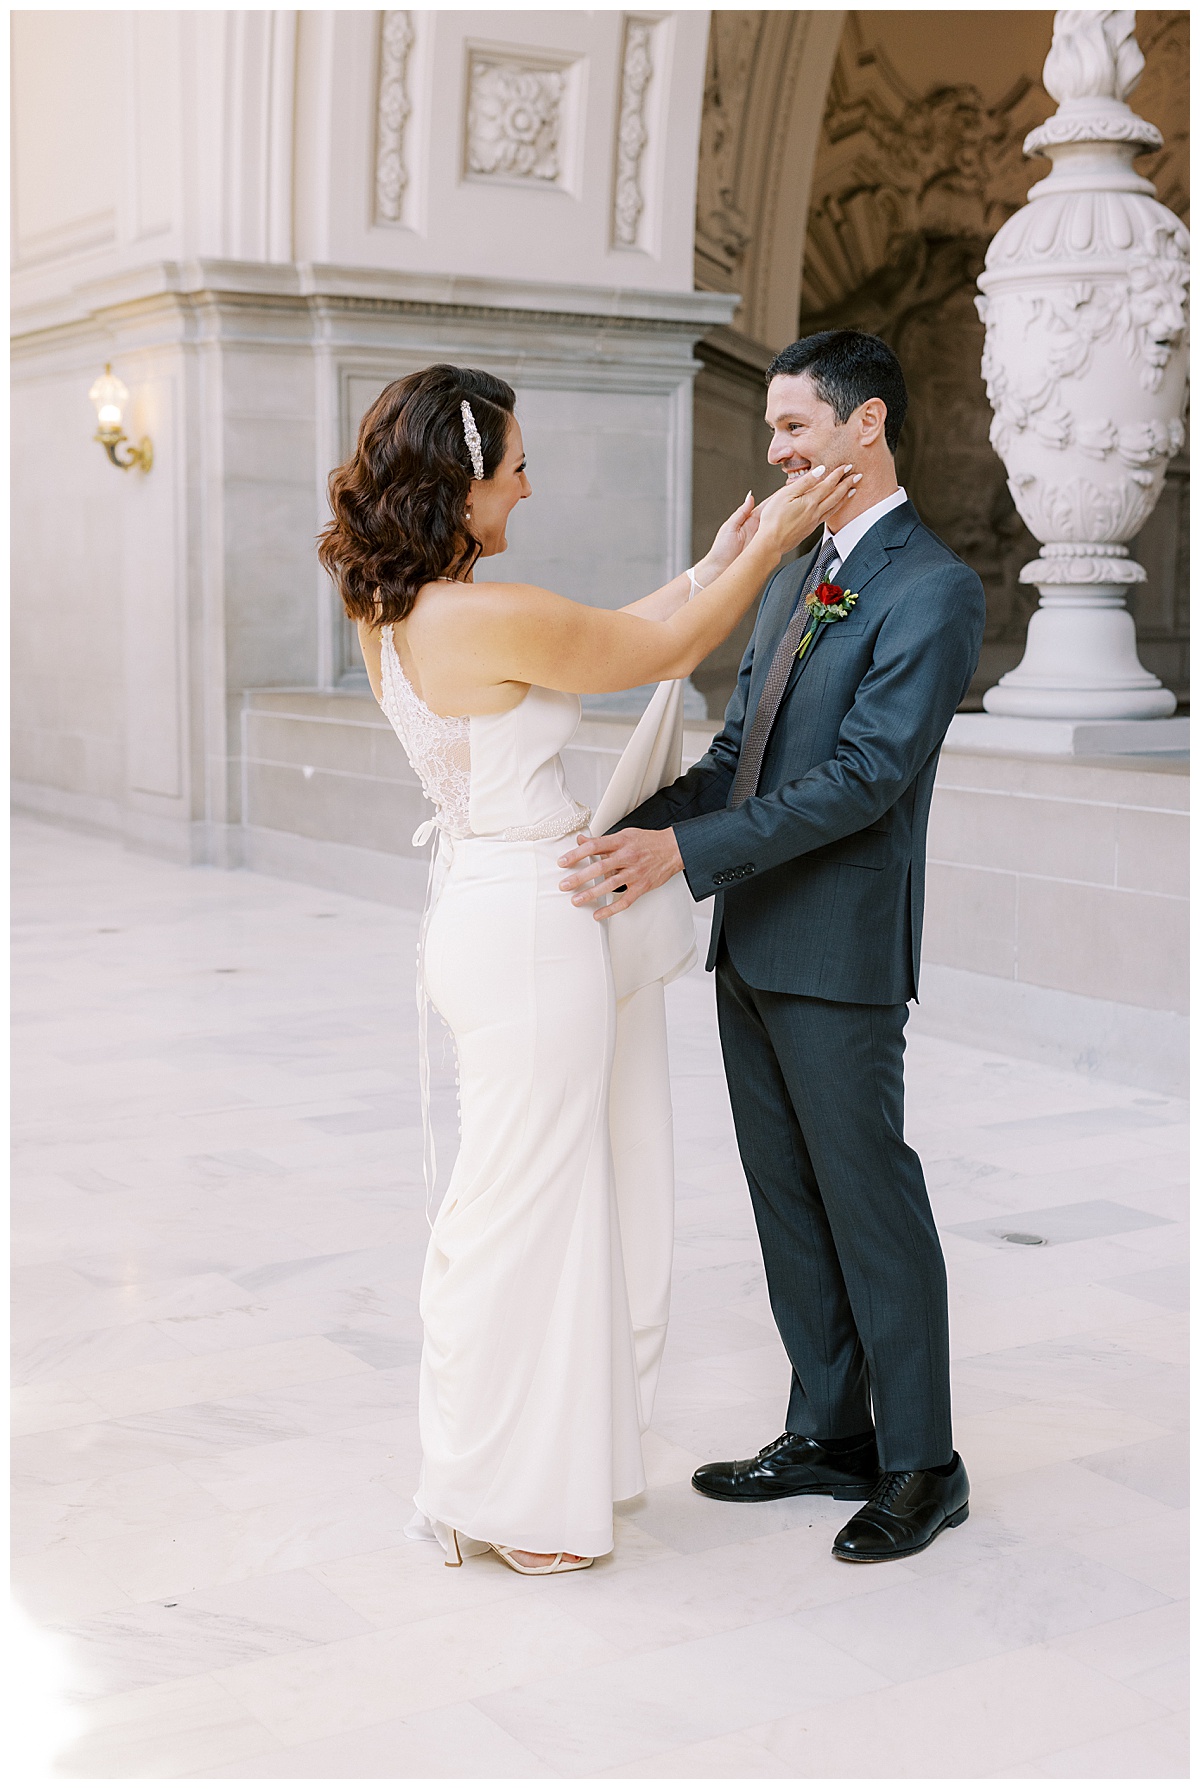 Hillary and Nick's first look before their vintage glam SF City Hall wedding